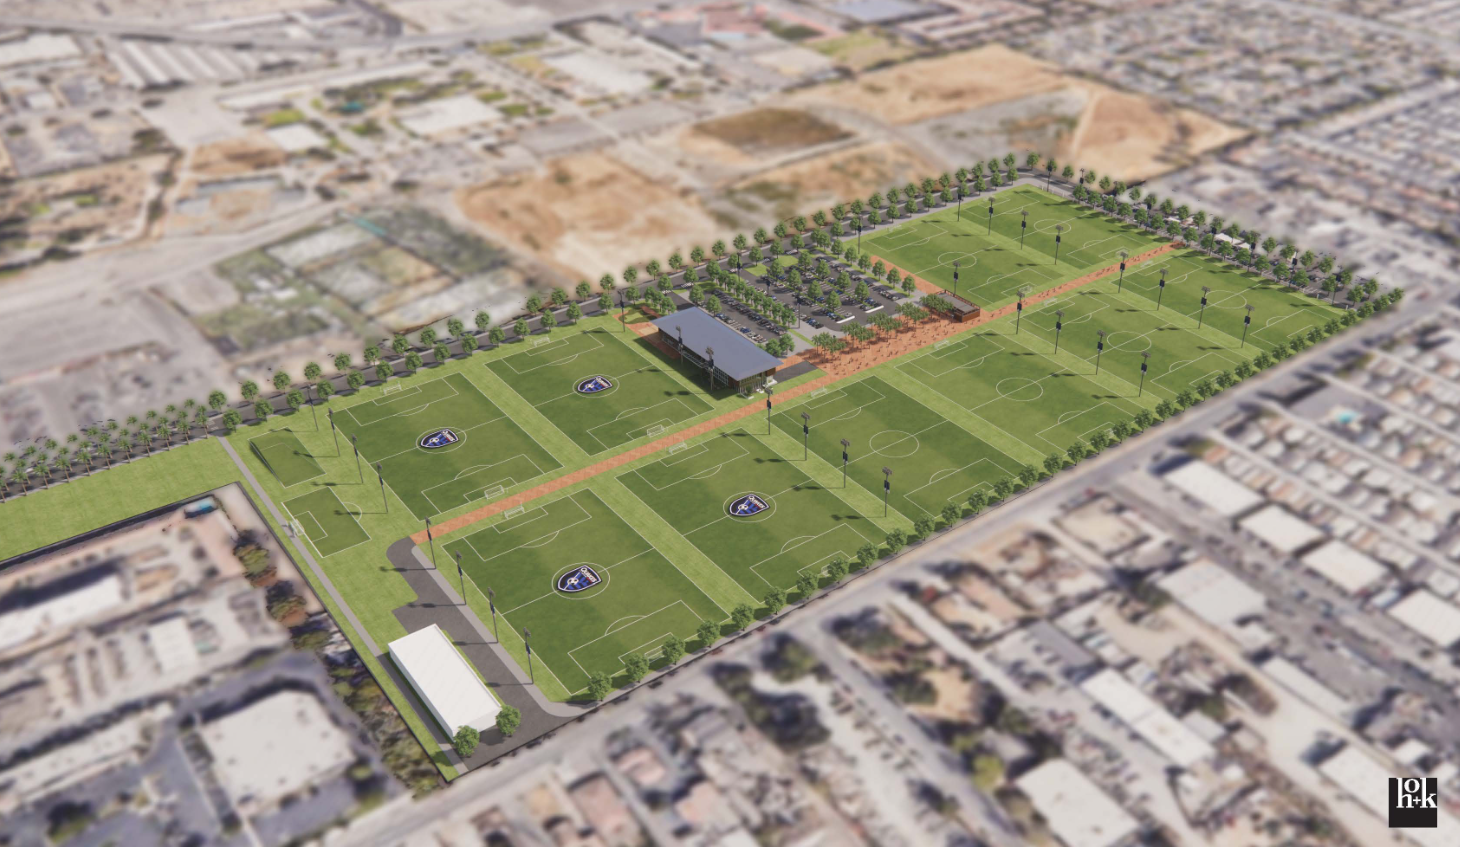 Rendered drawing of a soccer field complex with 10 soccer fields and a structure.